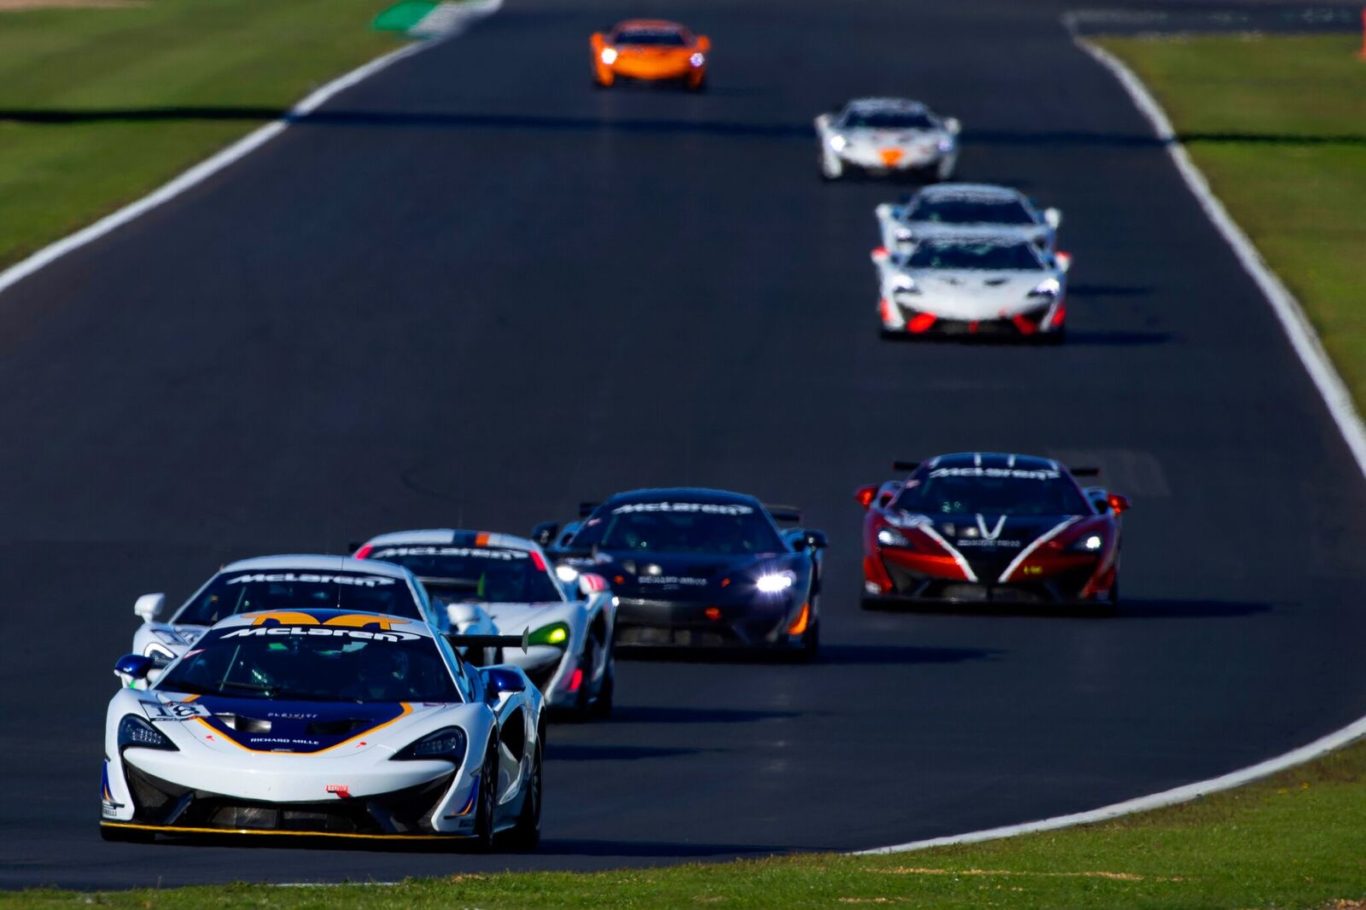 Serving as McLaren’s answer to the Ferrari Corse Clienti package, Pure McLaren is an opportunity for owners to drive their cars in anger on leading race circuits